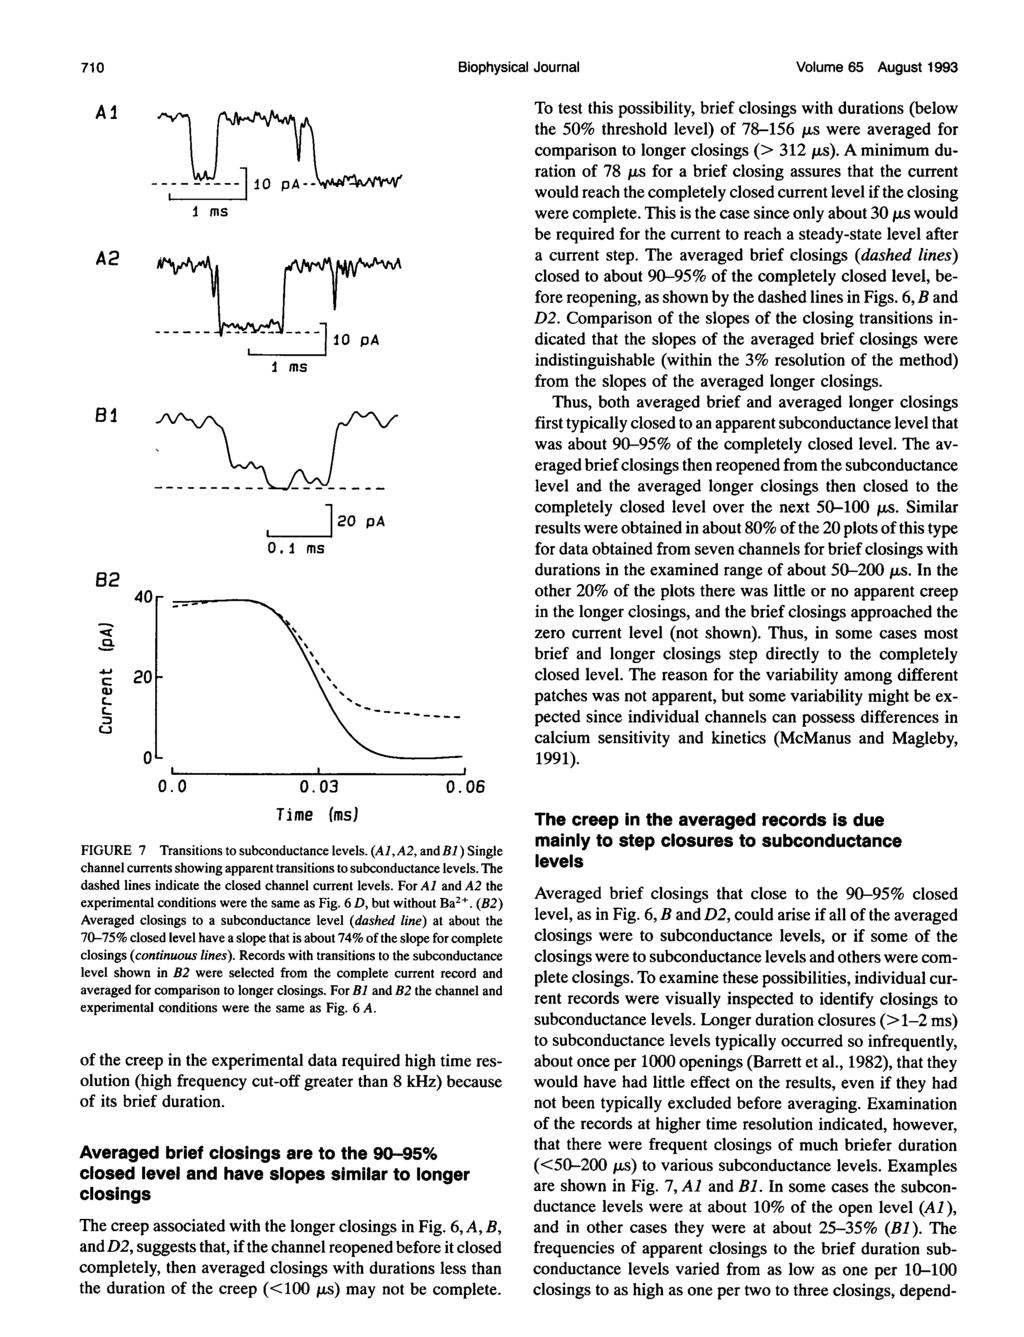 71 Biophysial Journal Volume 65 August 1993 Ai A2 81 82 O C: C. 4r 21 Ms i ms. 1 ms 2 pa..3.6 FGURE 7 Transitions to subondutane levels.